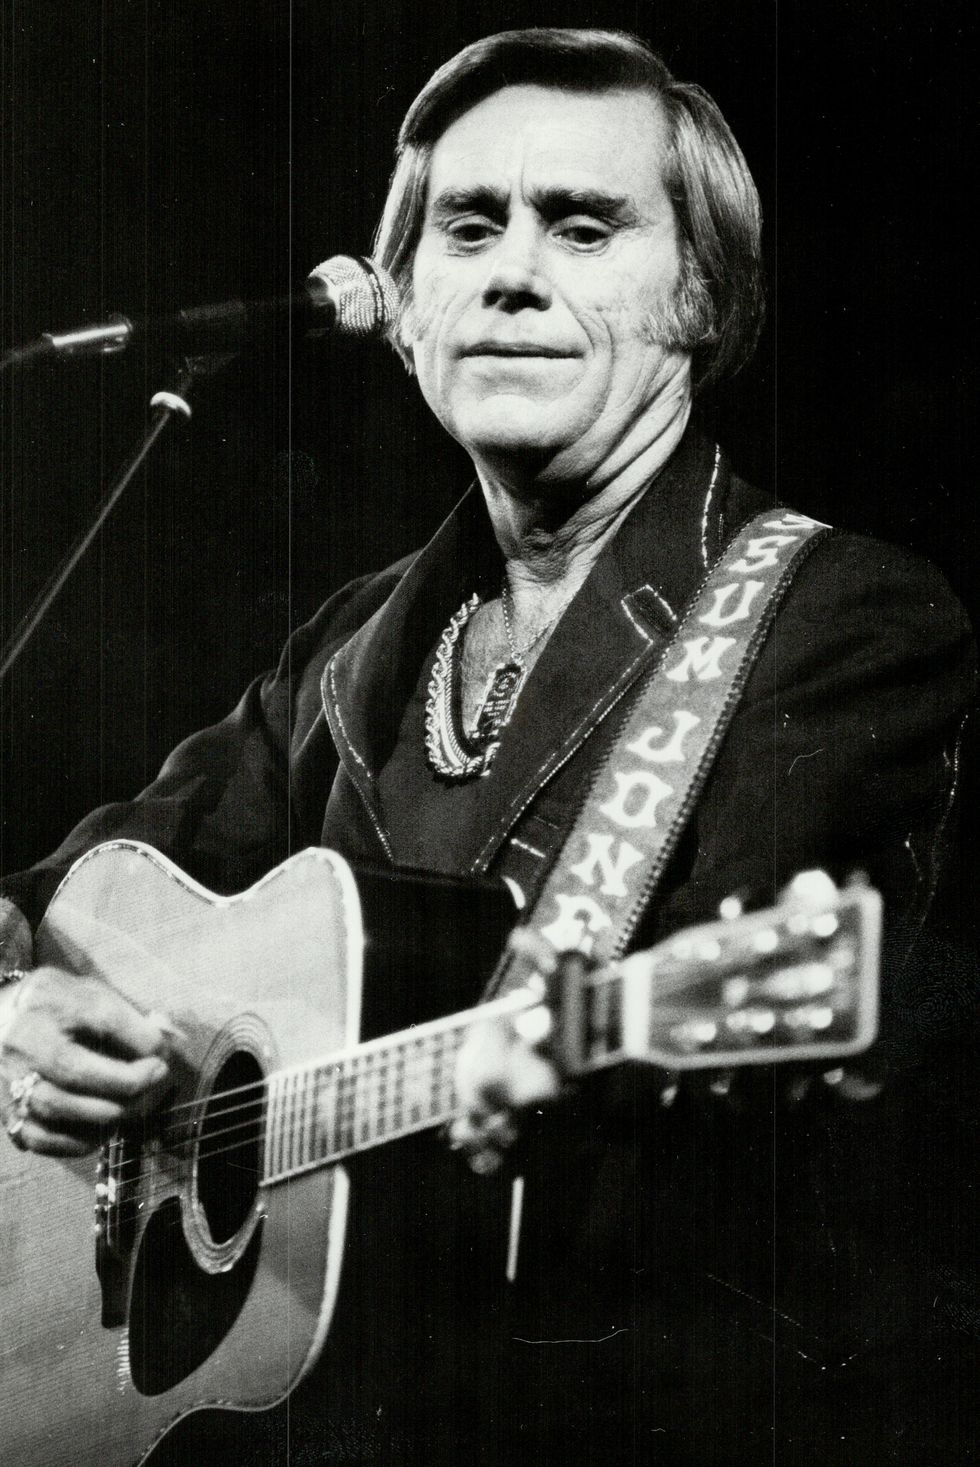 close up of singer george jones playing guitar at a concert